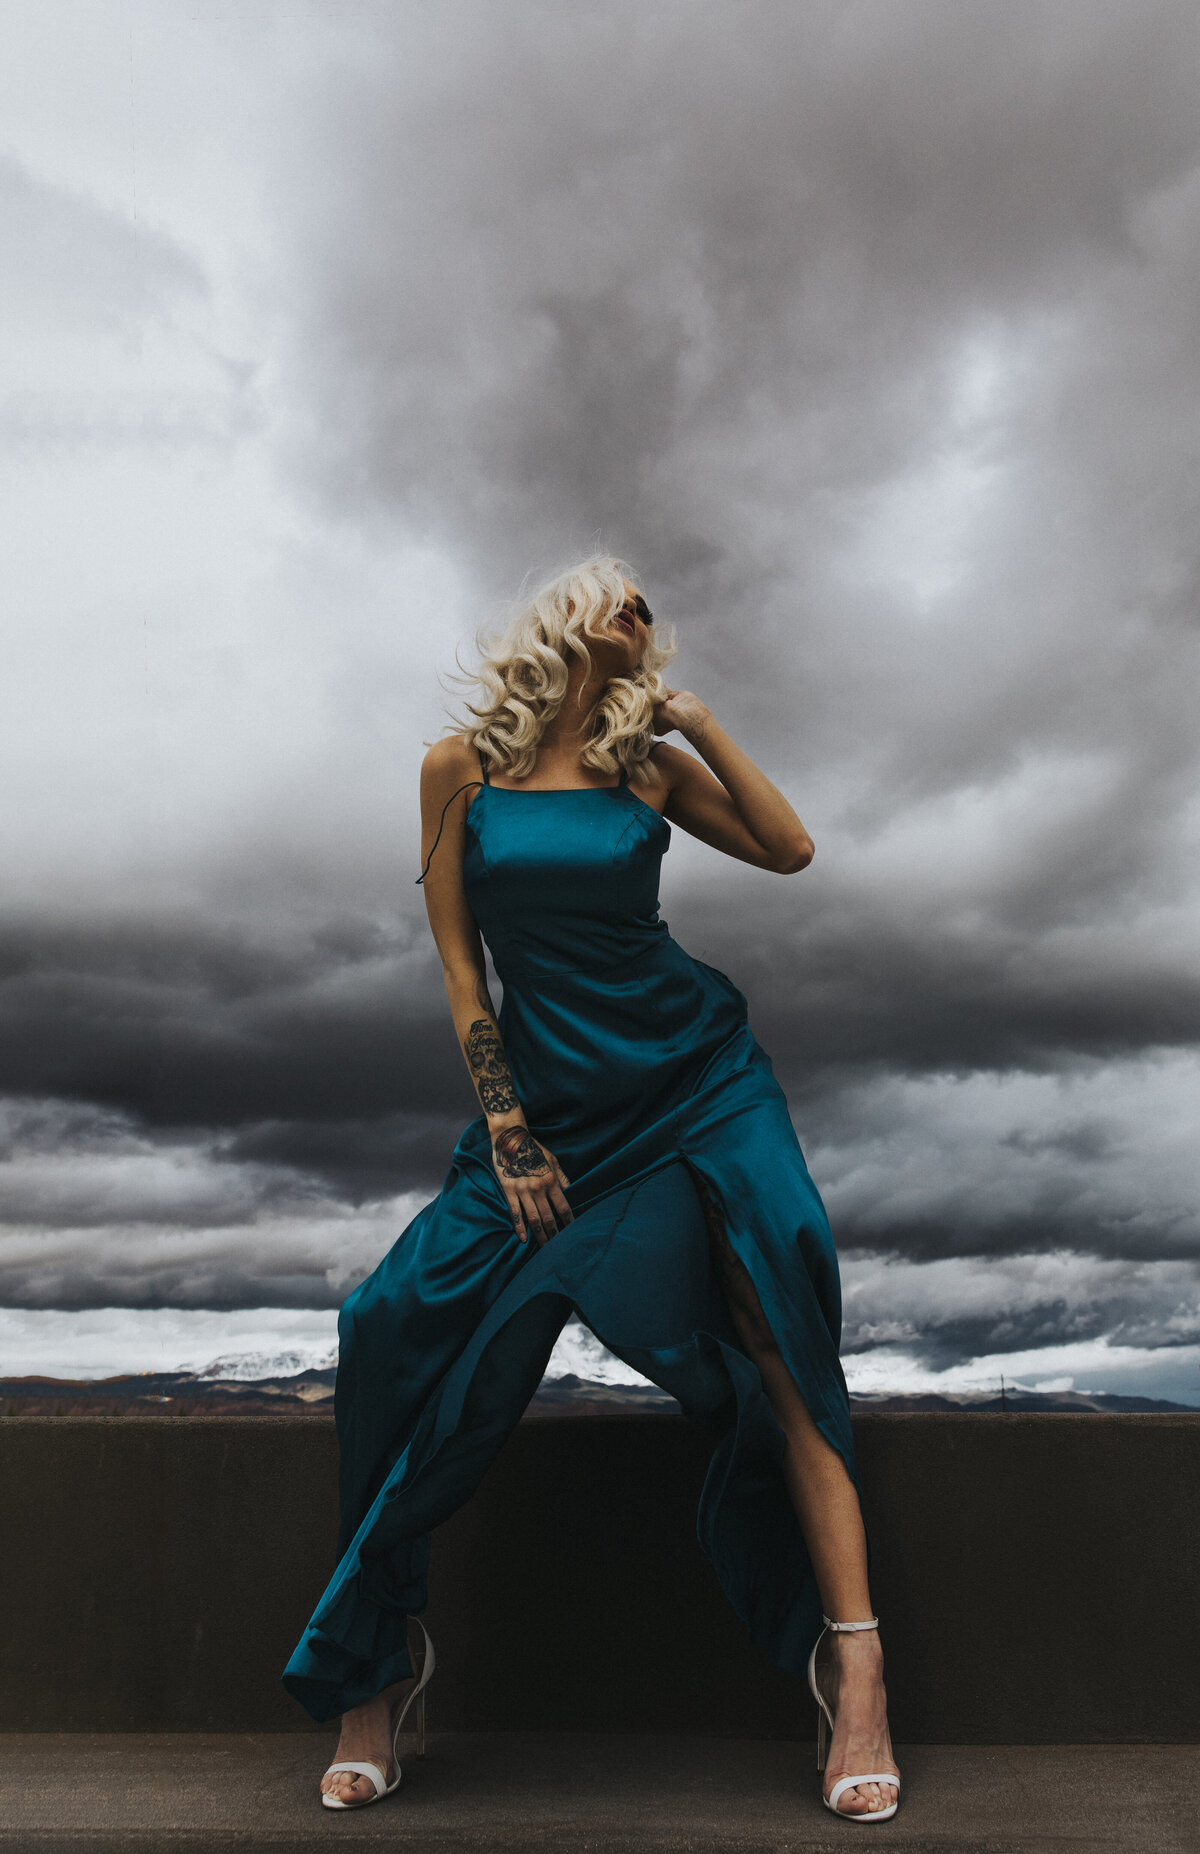 A woman in a blue dress is  standing in the wind of a strom